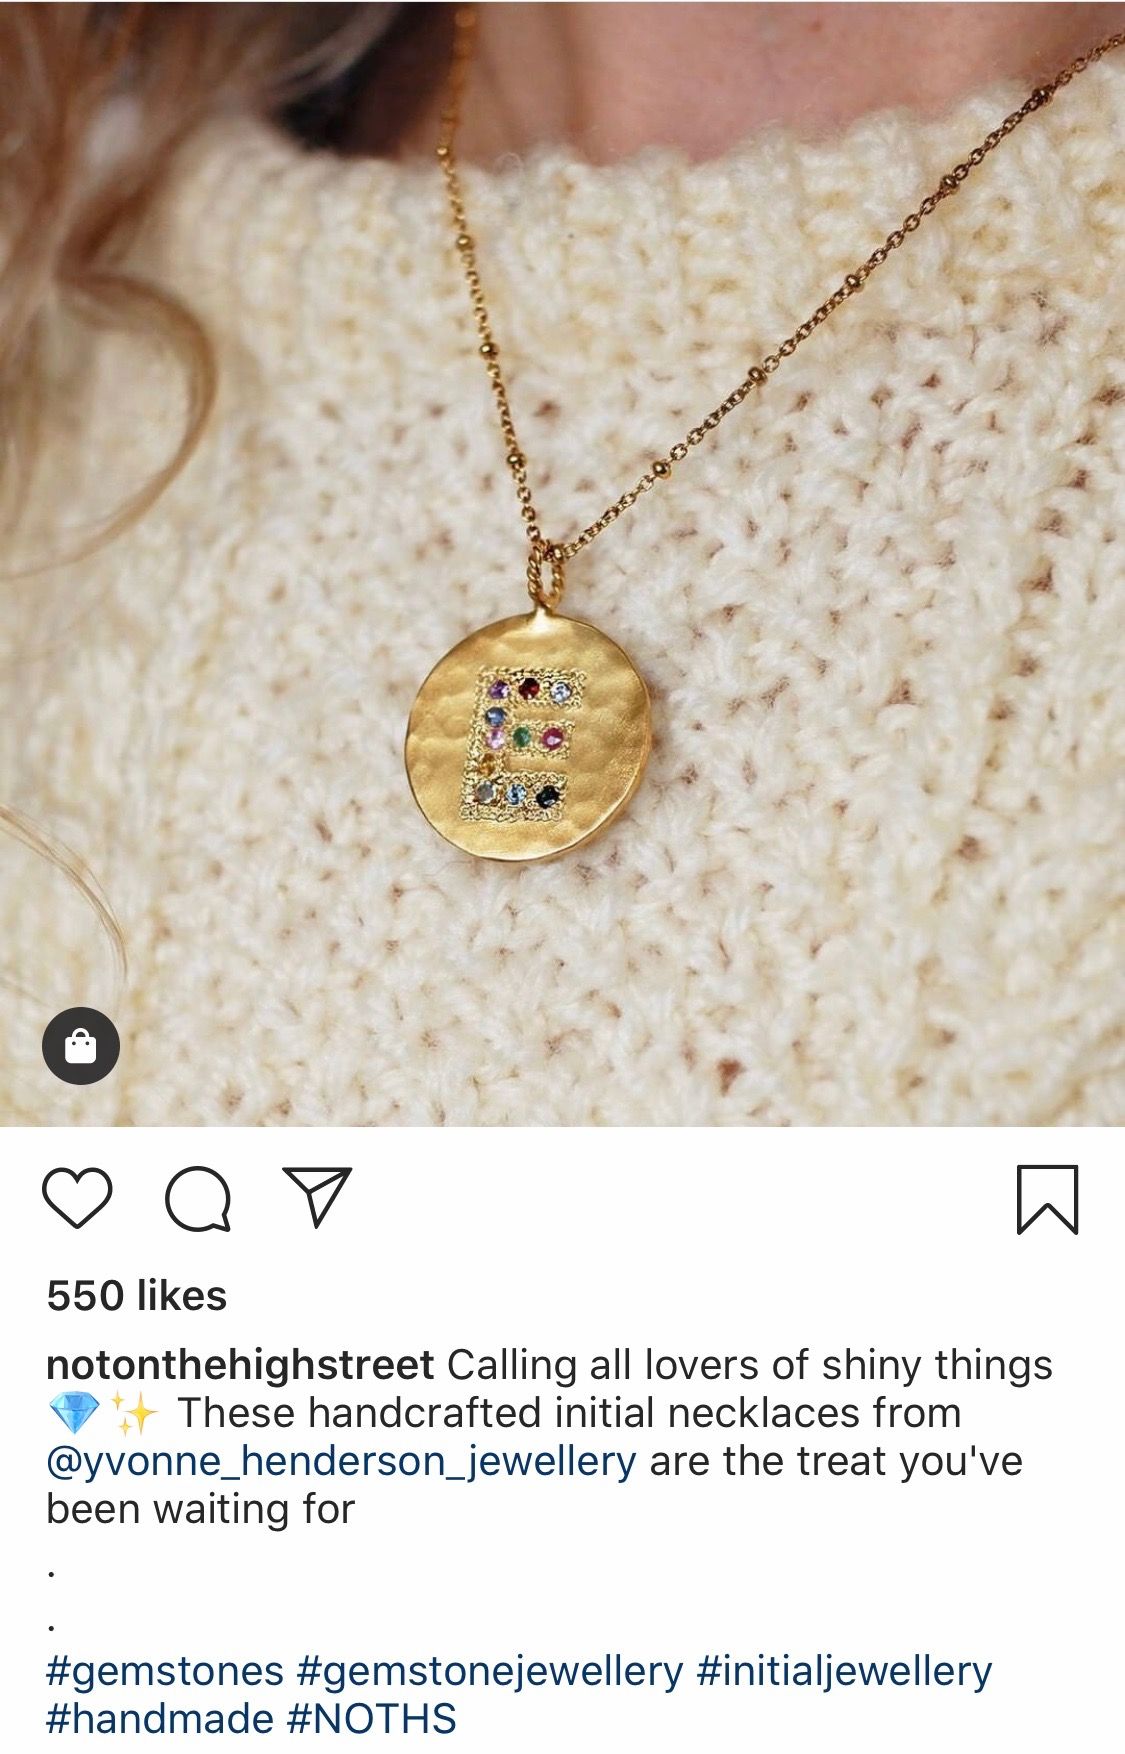 @notonthehighstreet Instagram post featuring a mix of relevant hashtags